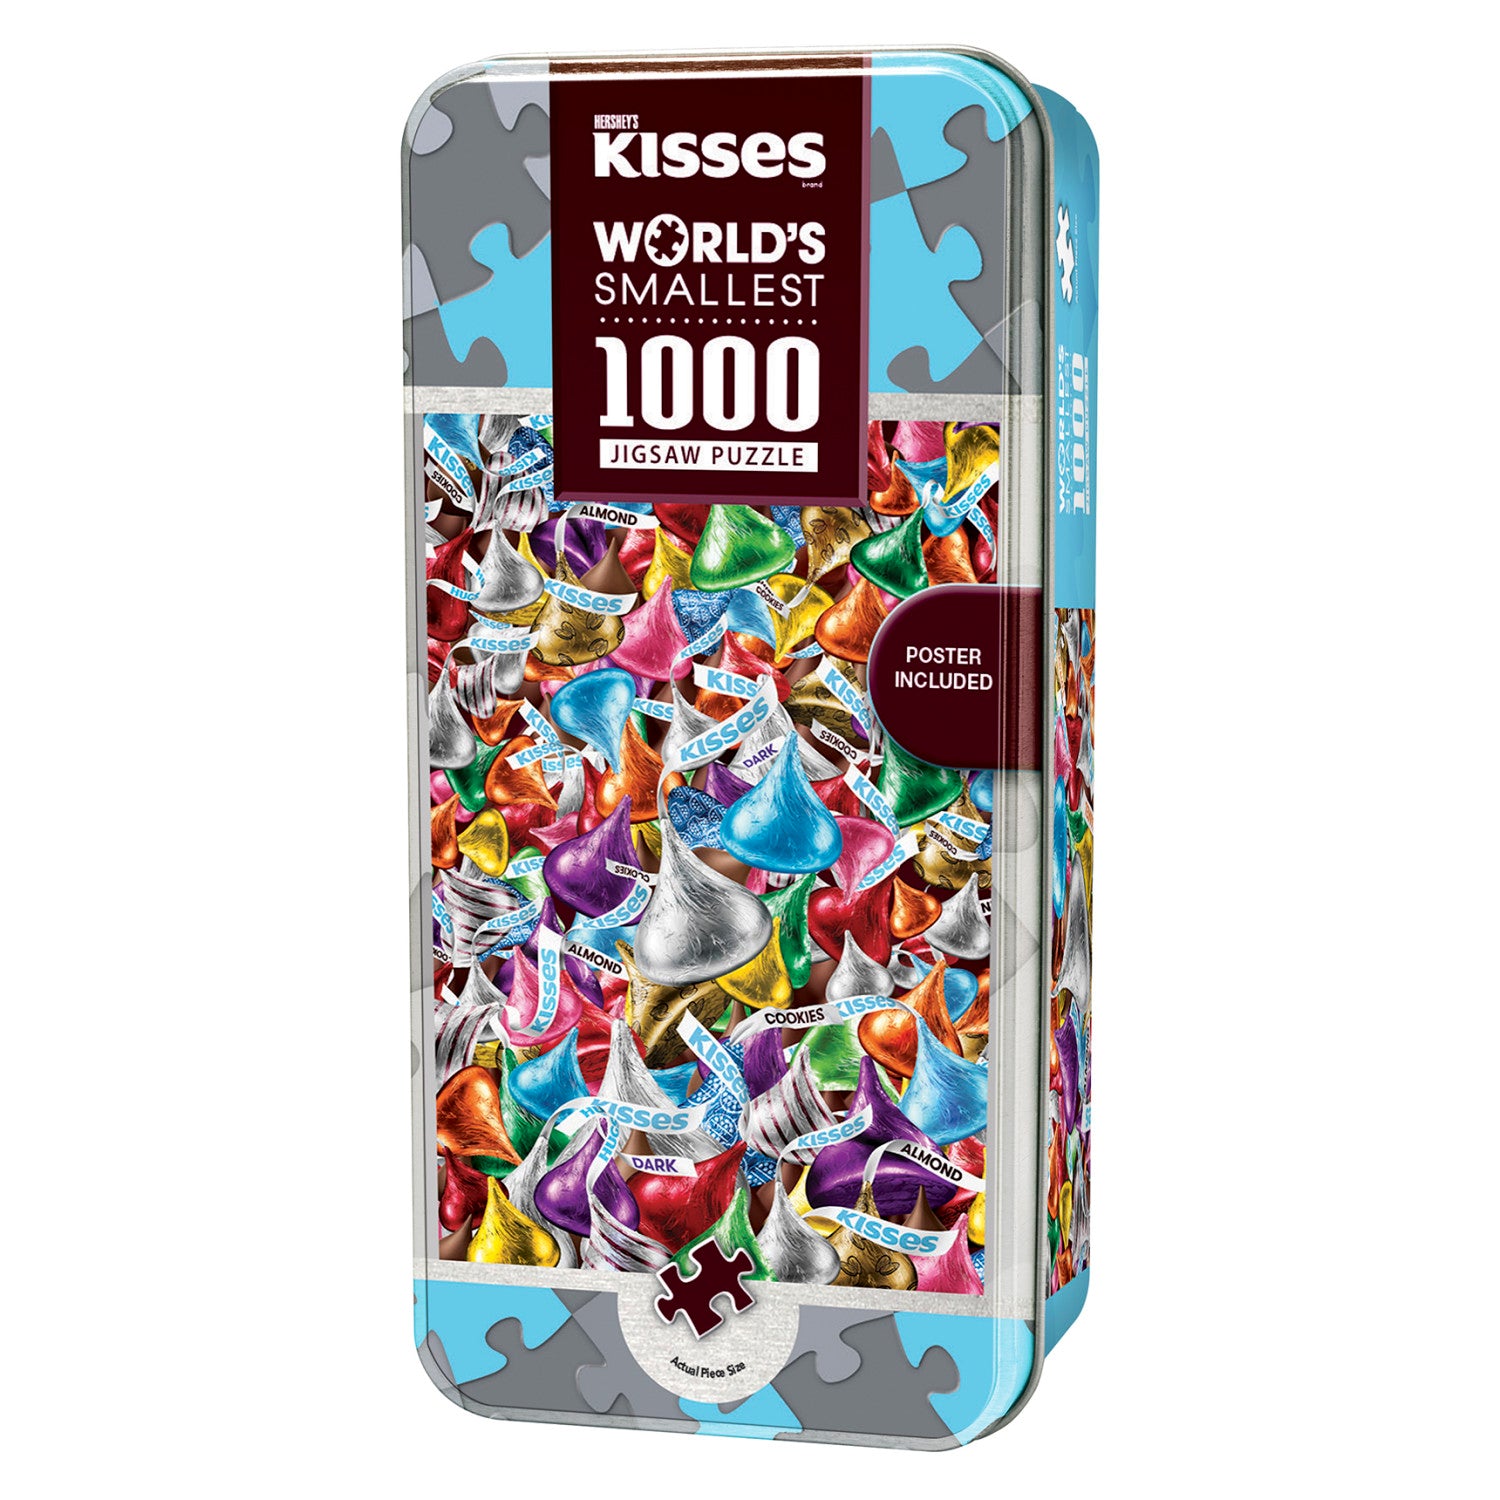 Worlds Smallest - Hershey's Kisses 1000 Piece Puzzle